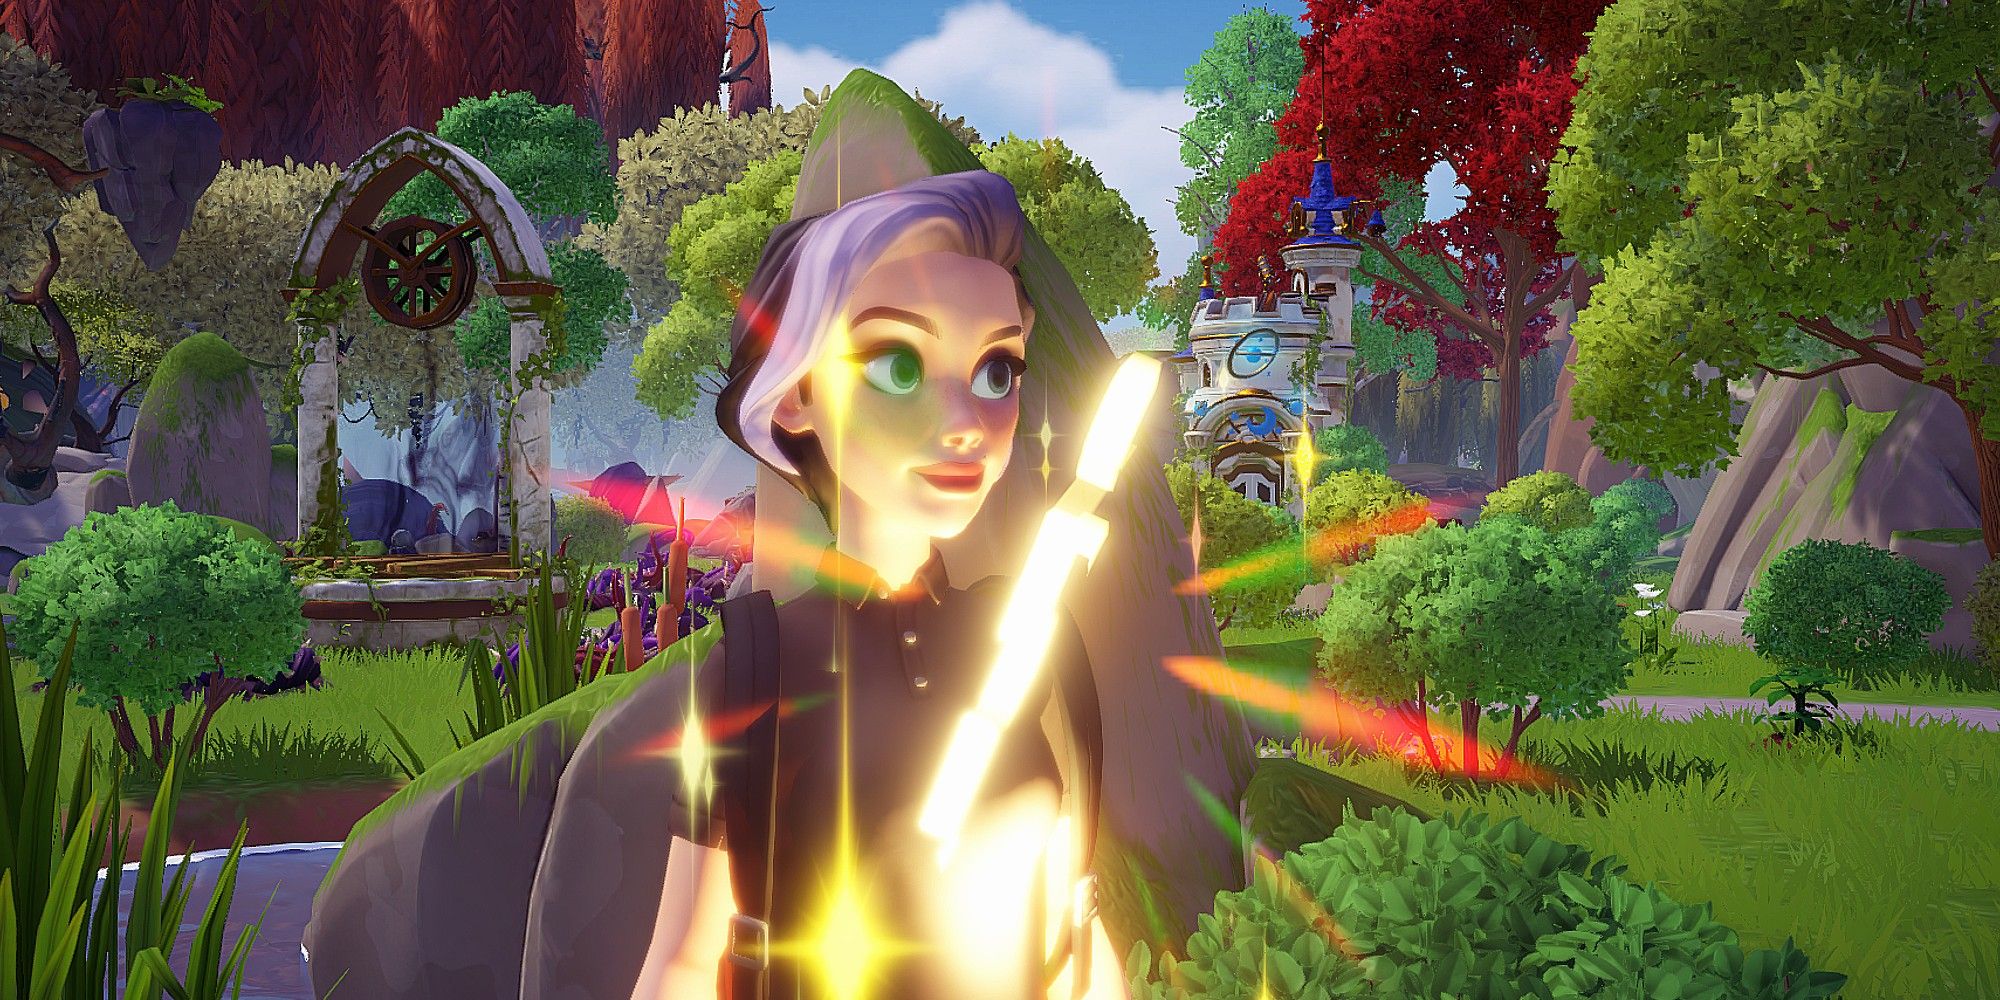 The Peaceful Meadow is an idyllic spot to hang out in Dreamlight Valley